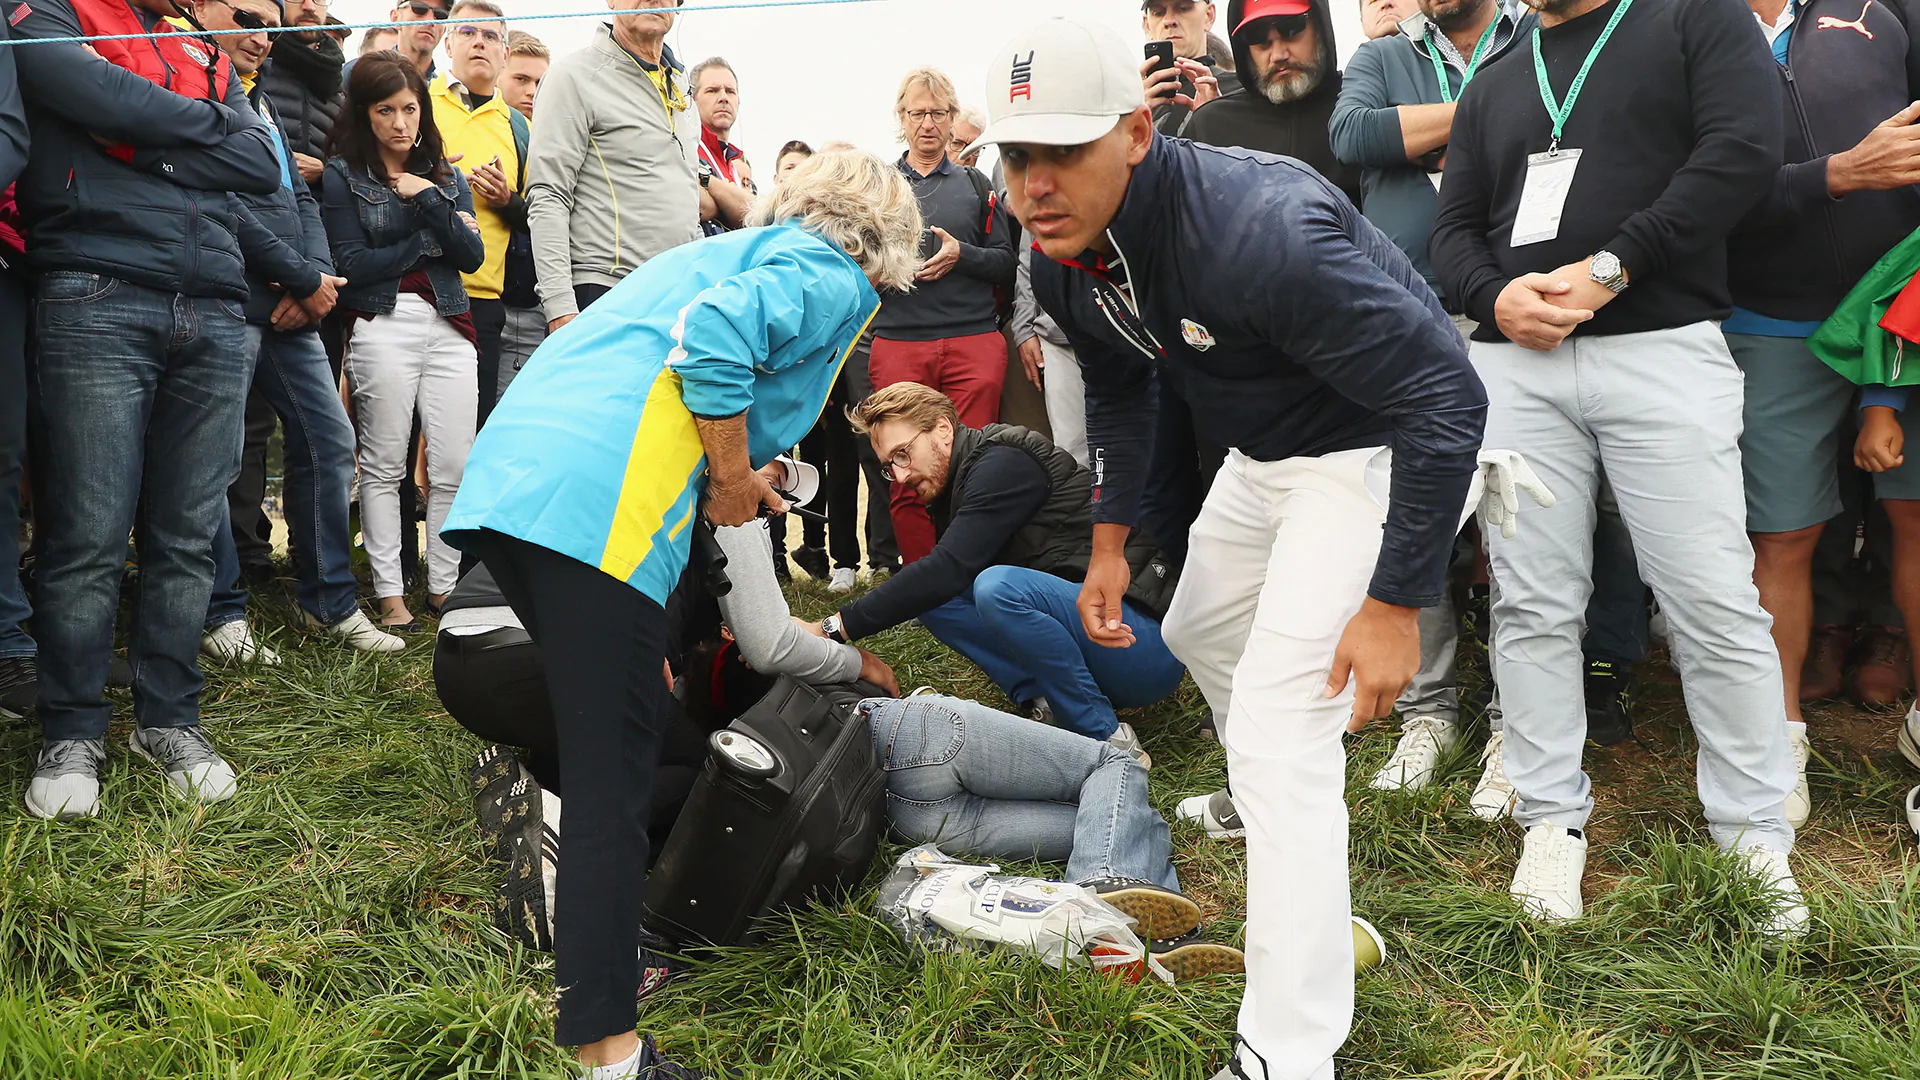 Koepka hits fan with errant drive Friday morning